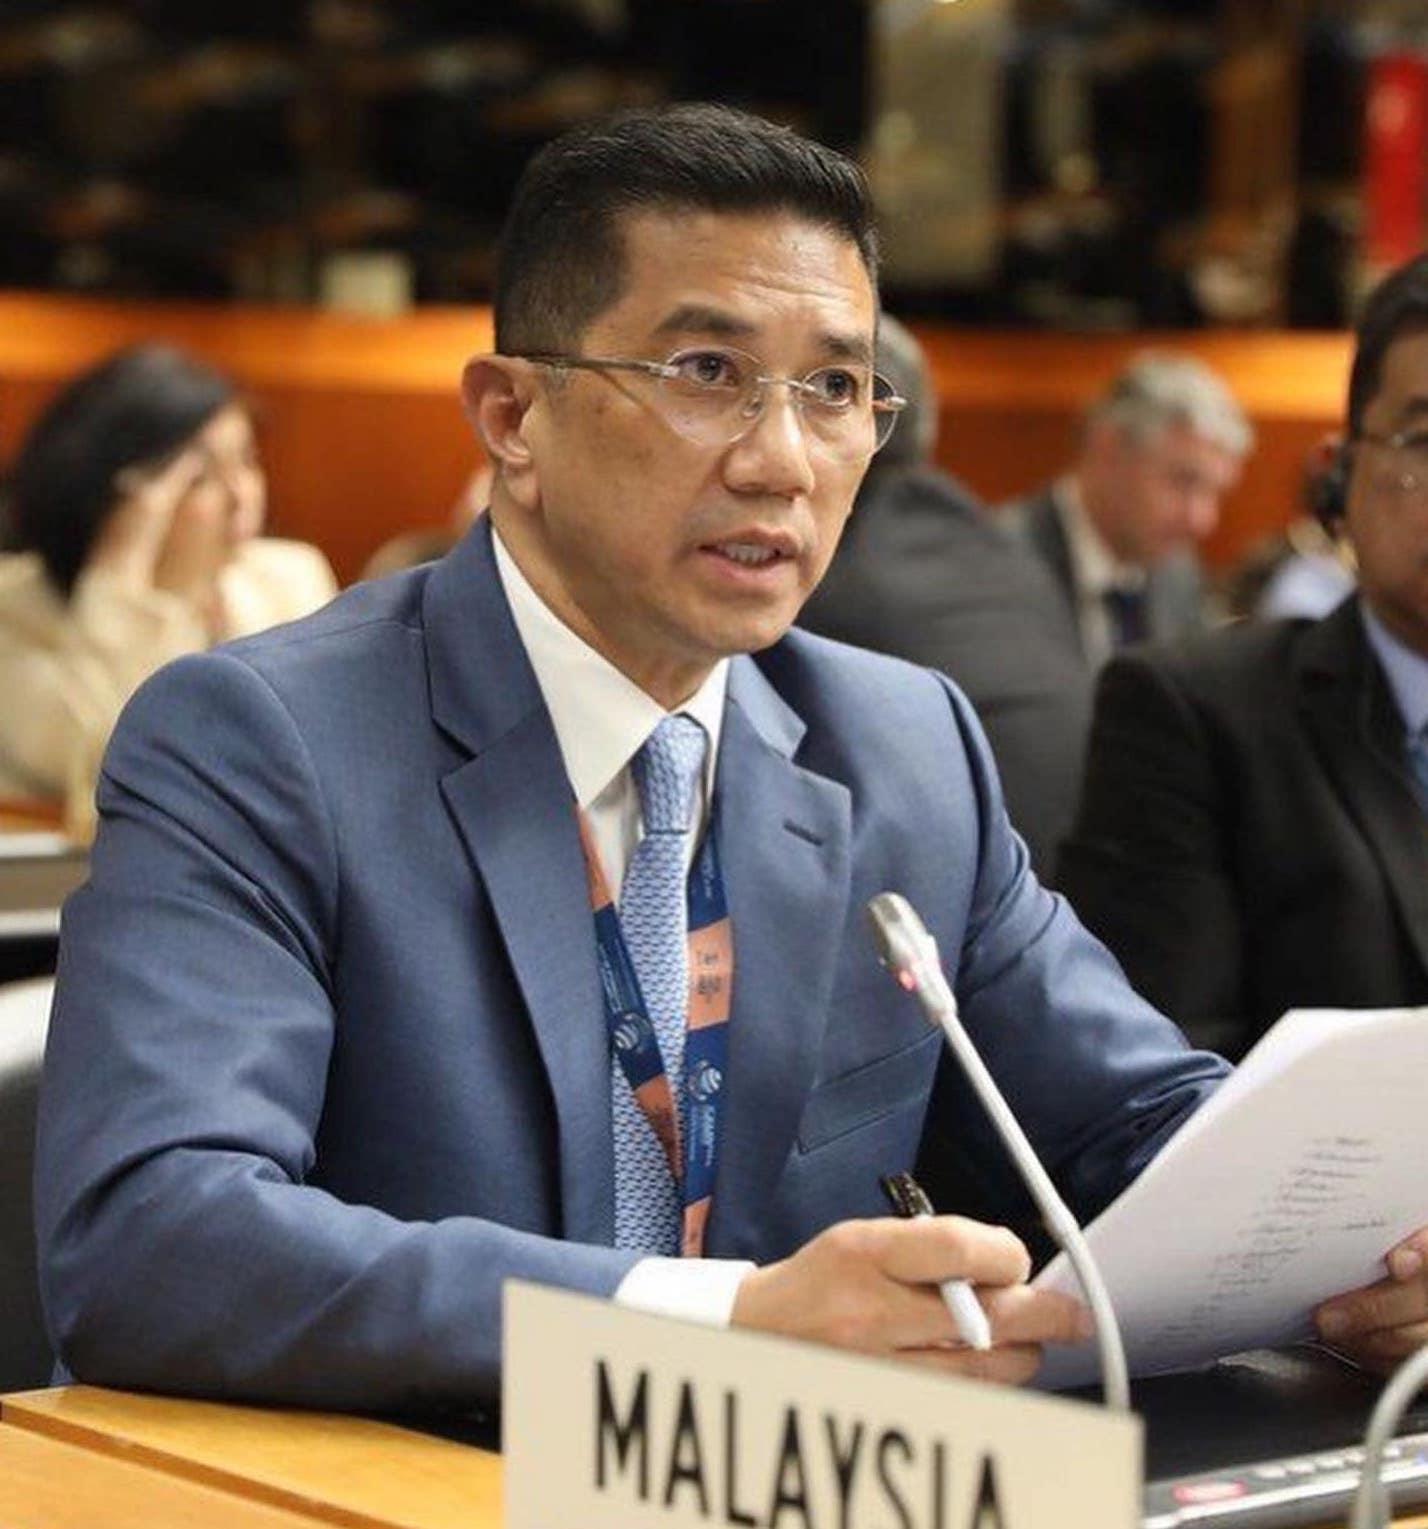 International Trade and Industry Minister Mohamed Azmin Ali at the 12th ministerial conference of the World Trade Organization in Geneva, Switzerland yesterday. Photo: Facebook